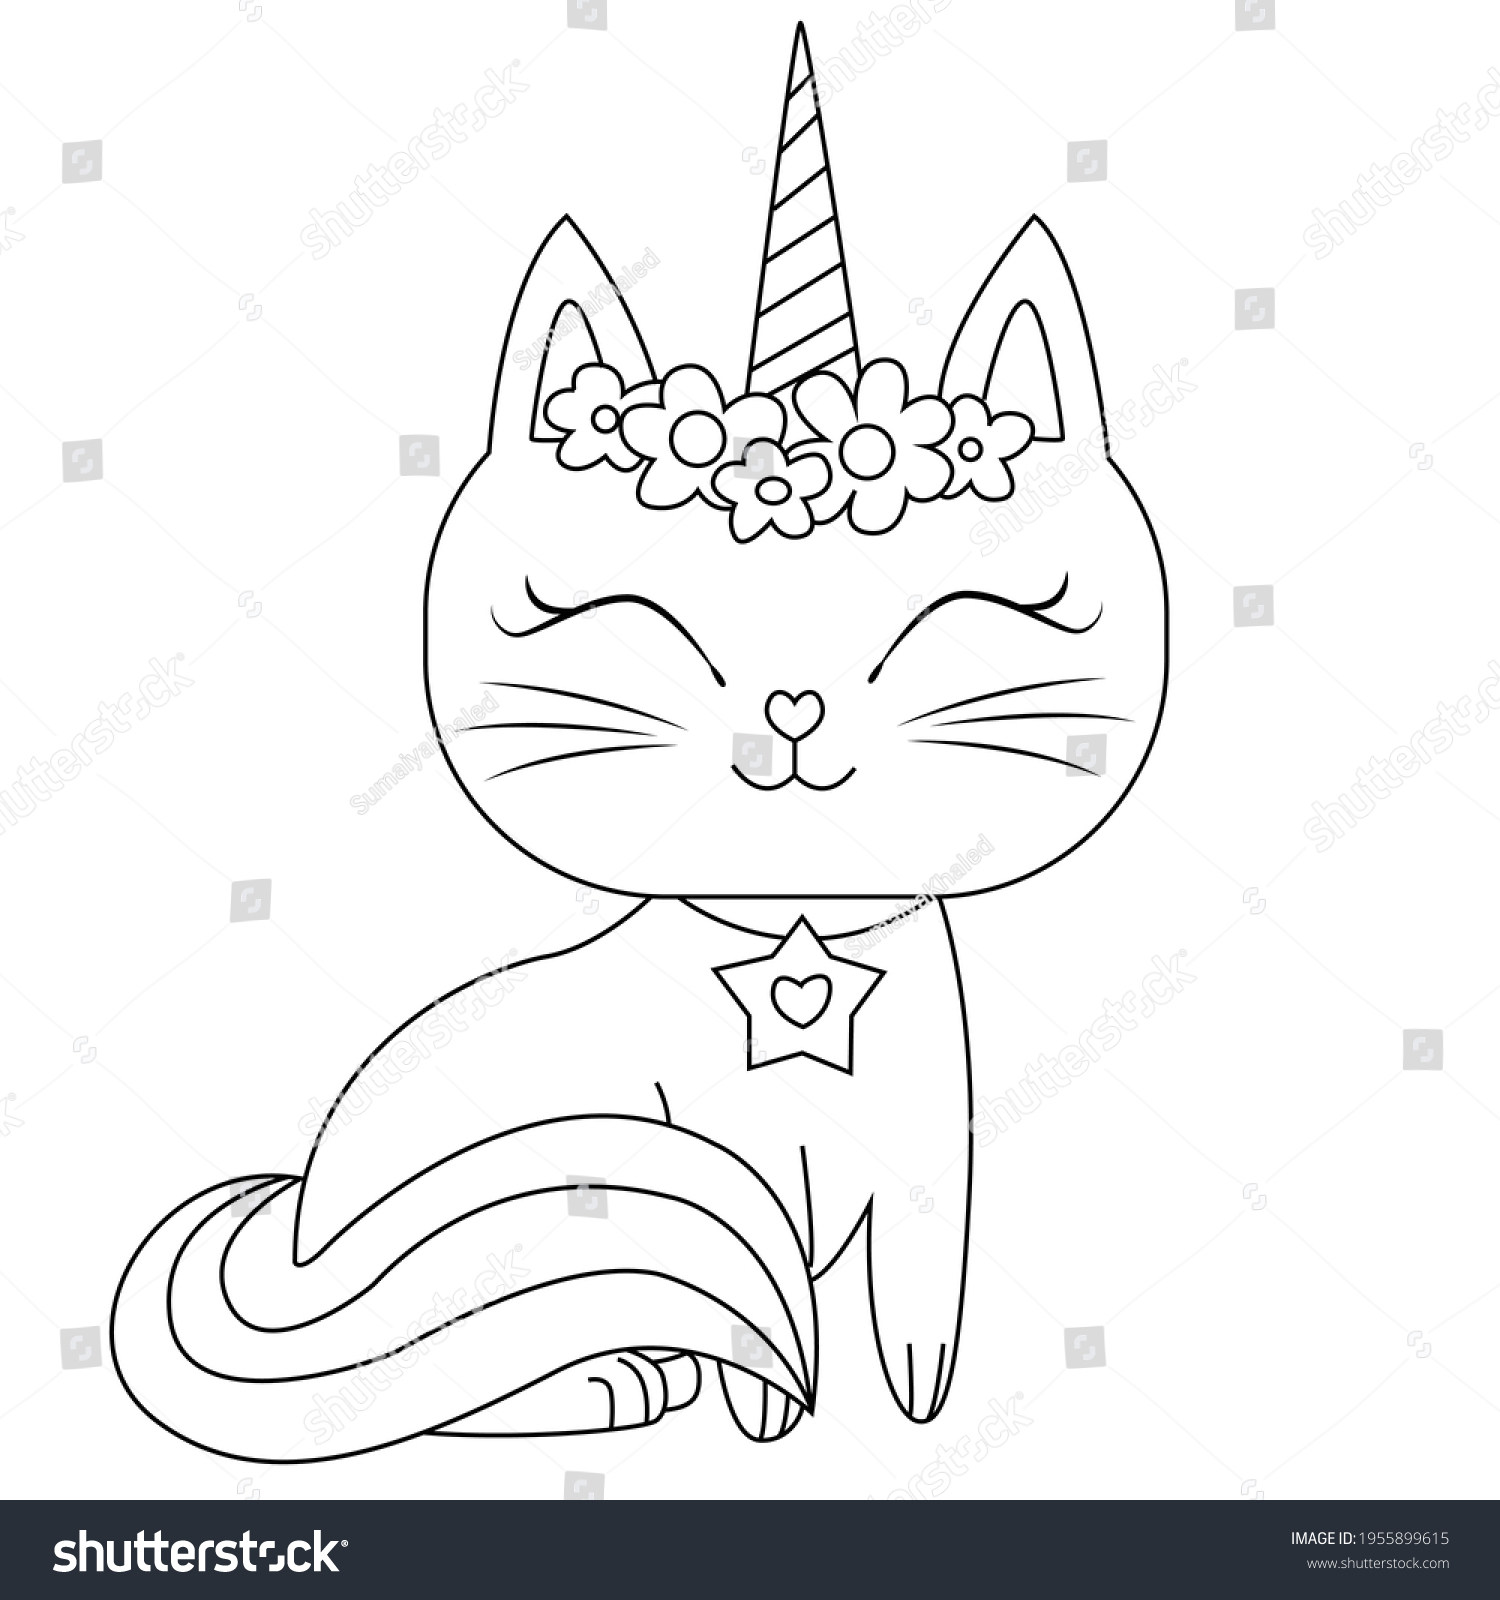 SVG of Caticorn Coloring Pages For Children and Adults svg